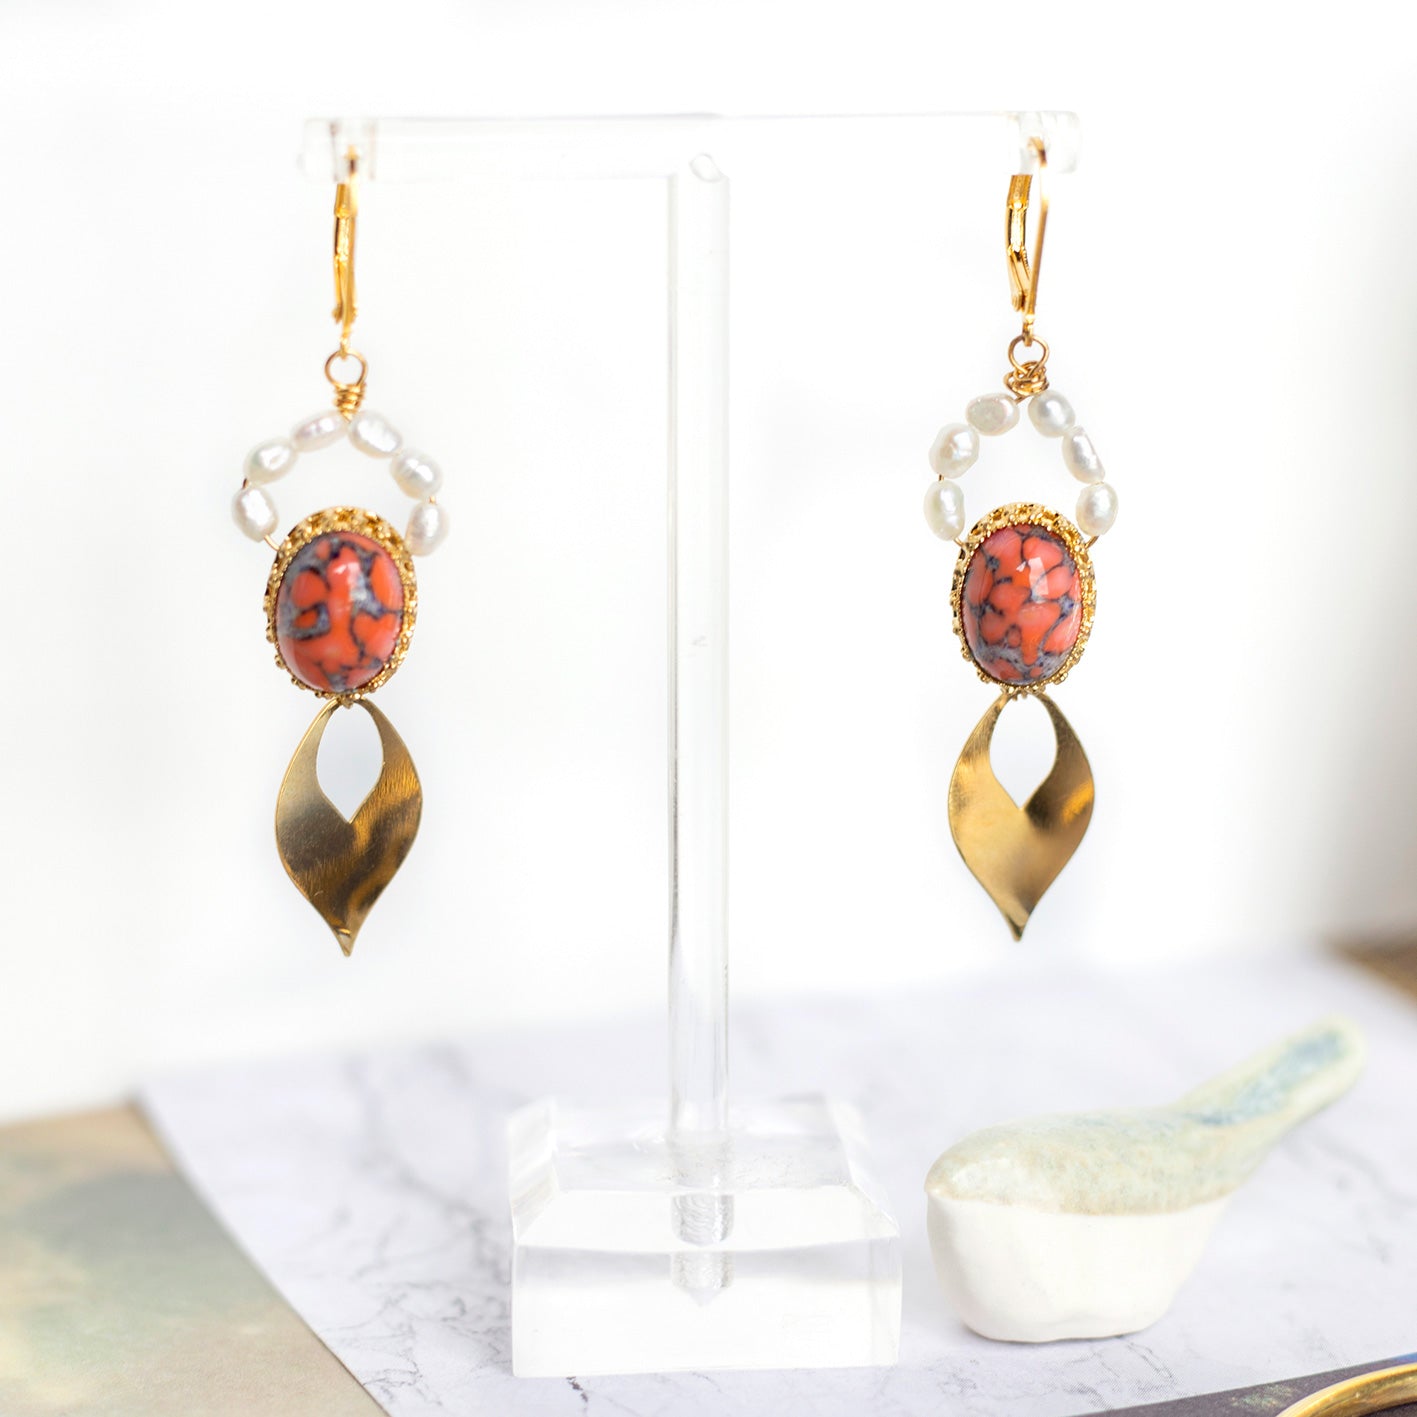 Vintage cabochon earrings in orange glass and freshwater pearls